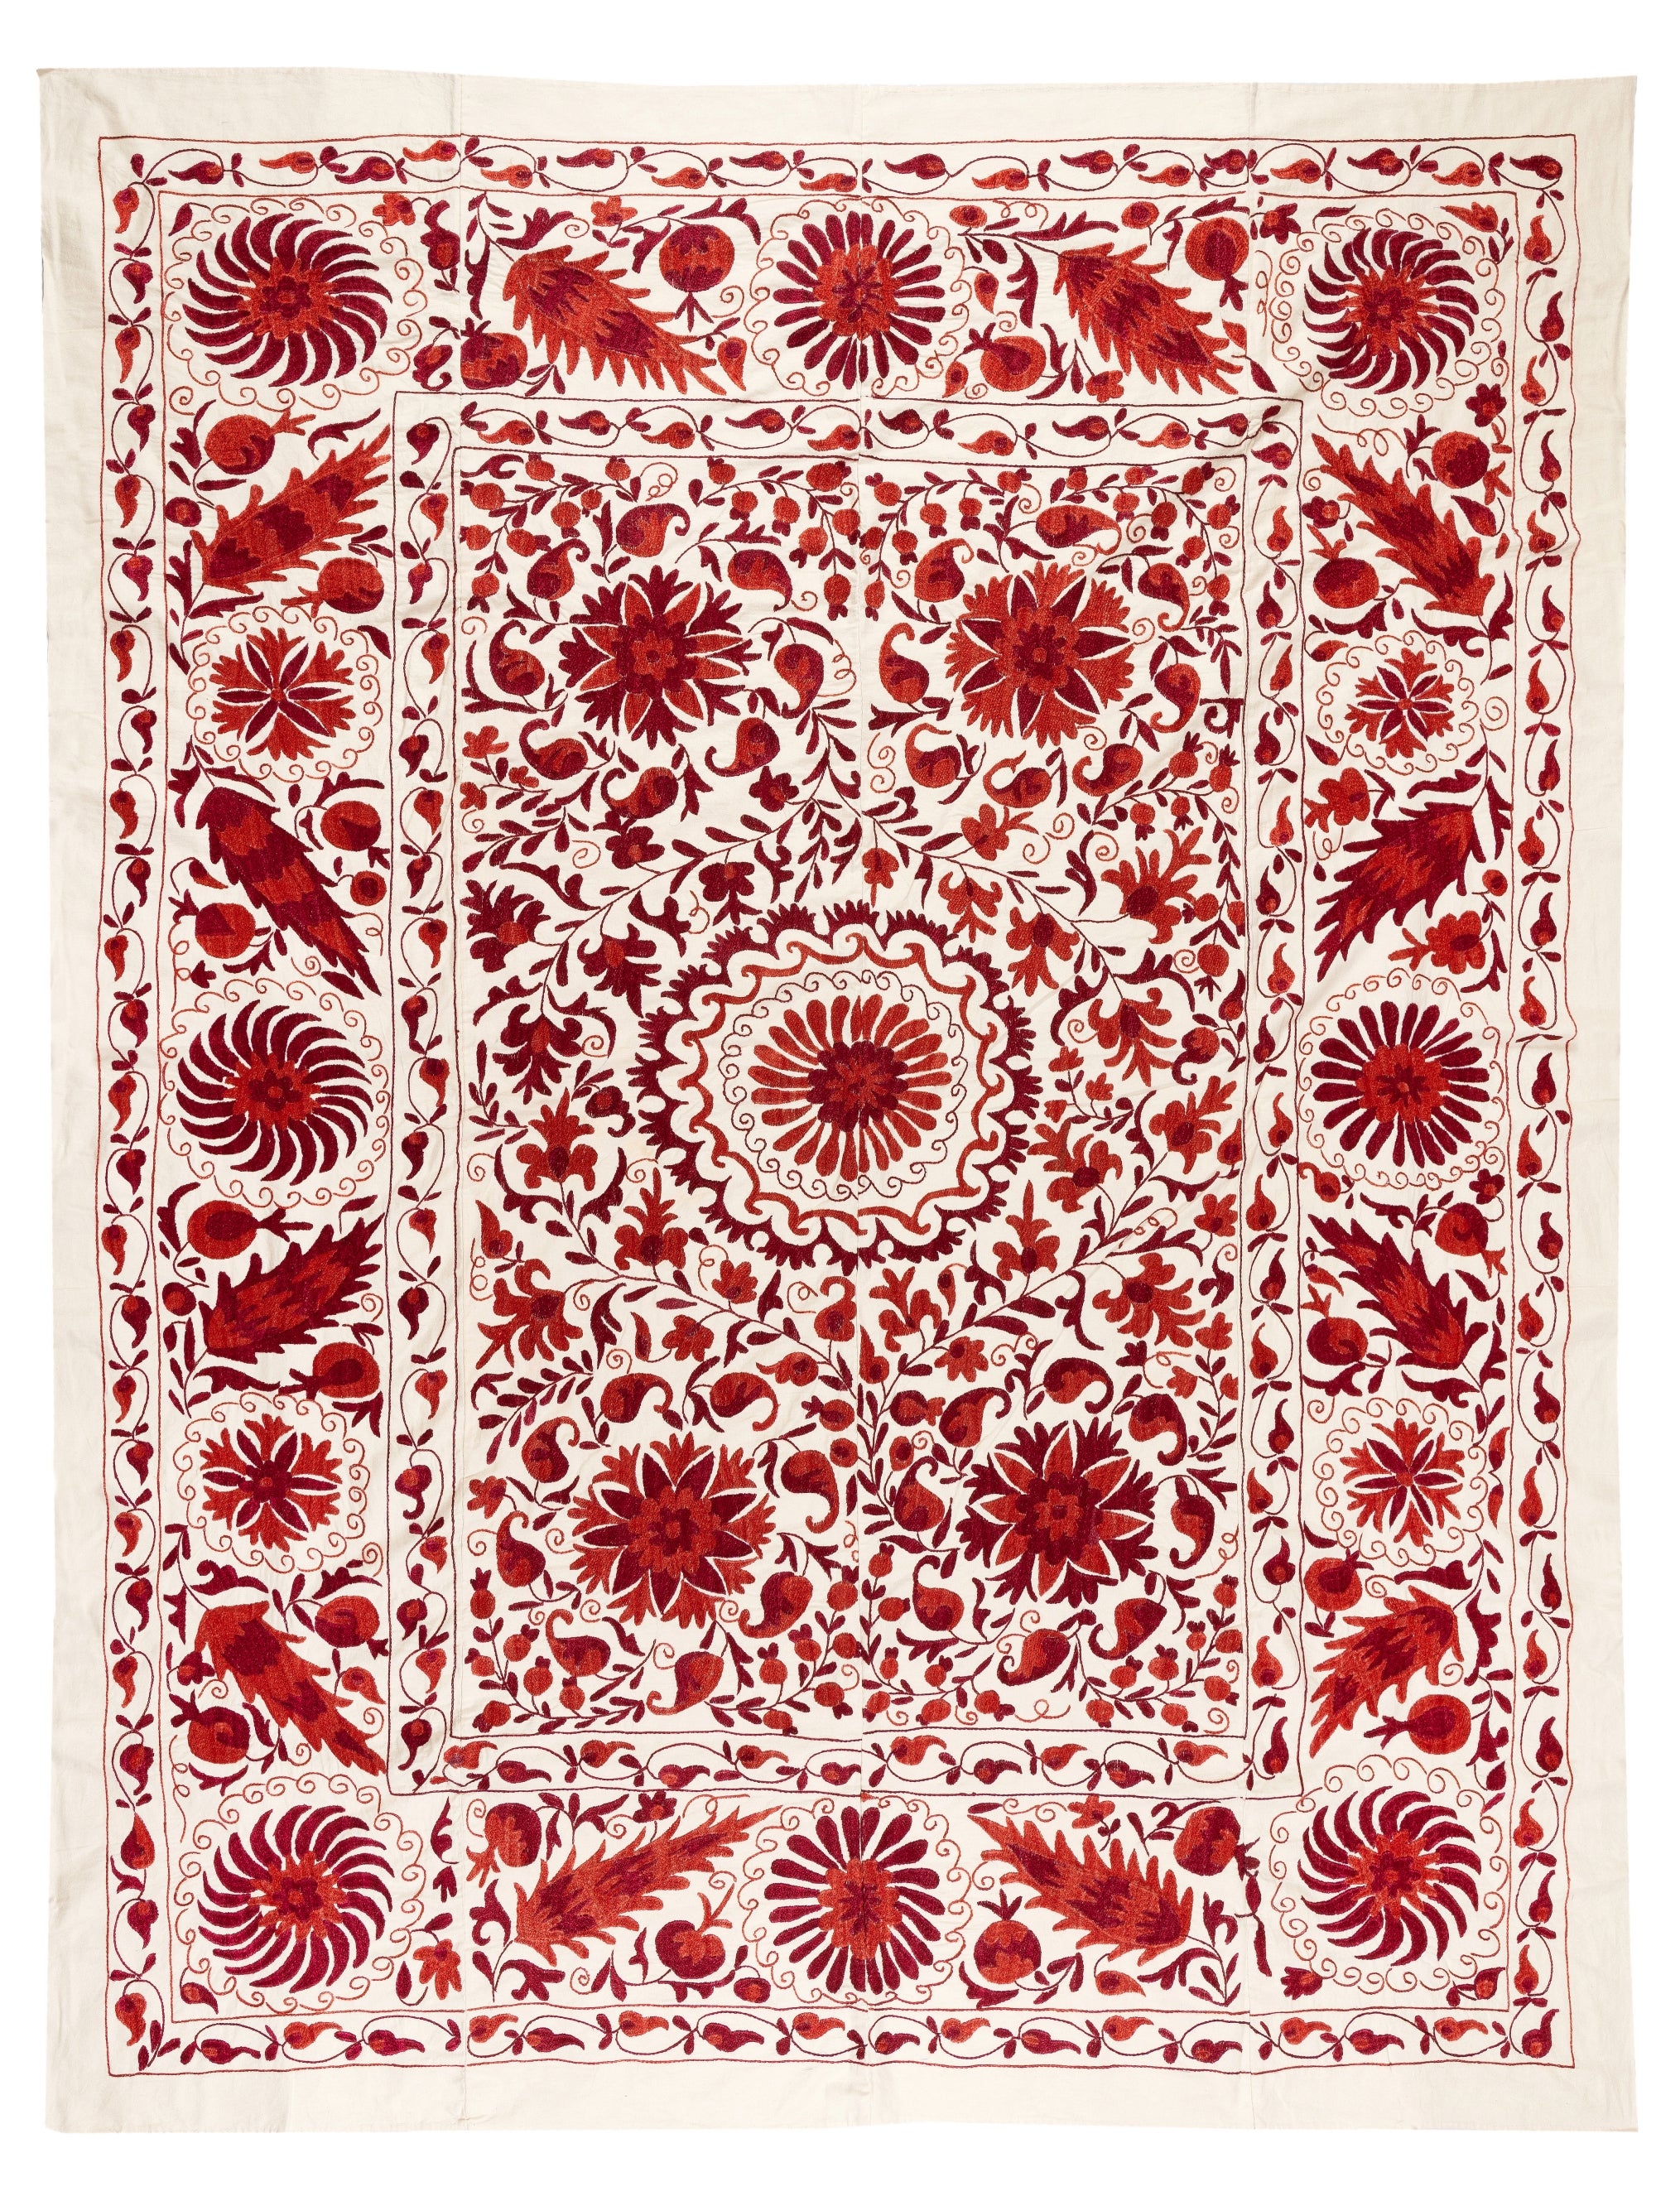 6.3x8 Ft Silk Embroidery Bed Cover in Red & Ivory, Handmade Suzani Wall Hanging